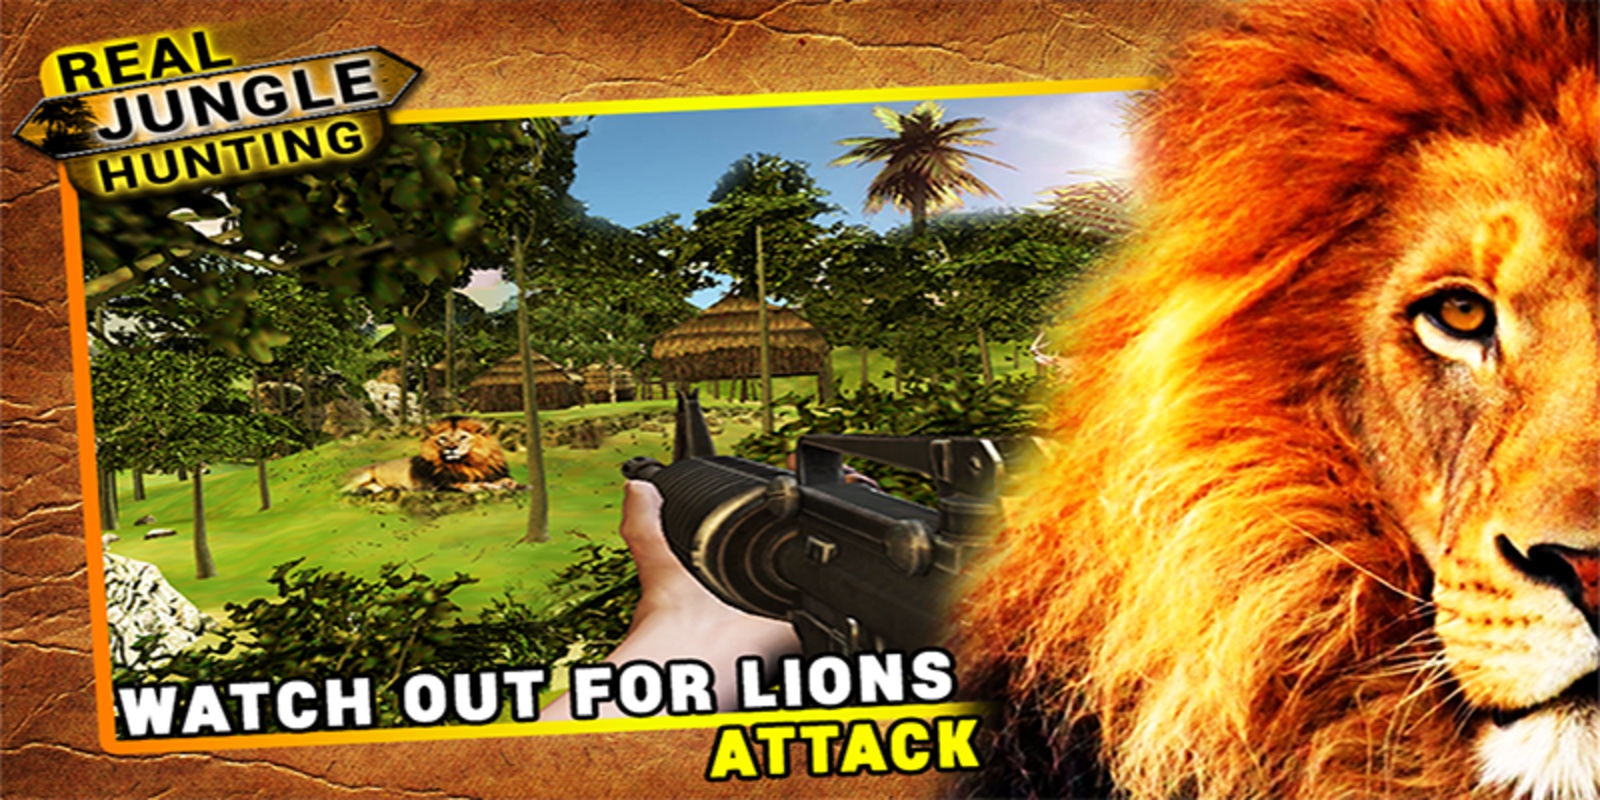 Real Jungle Hunting 1.9 APK feature